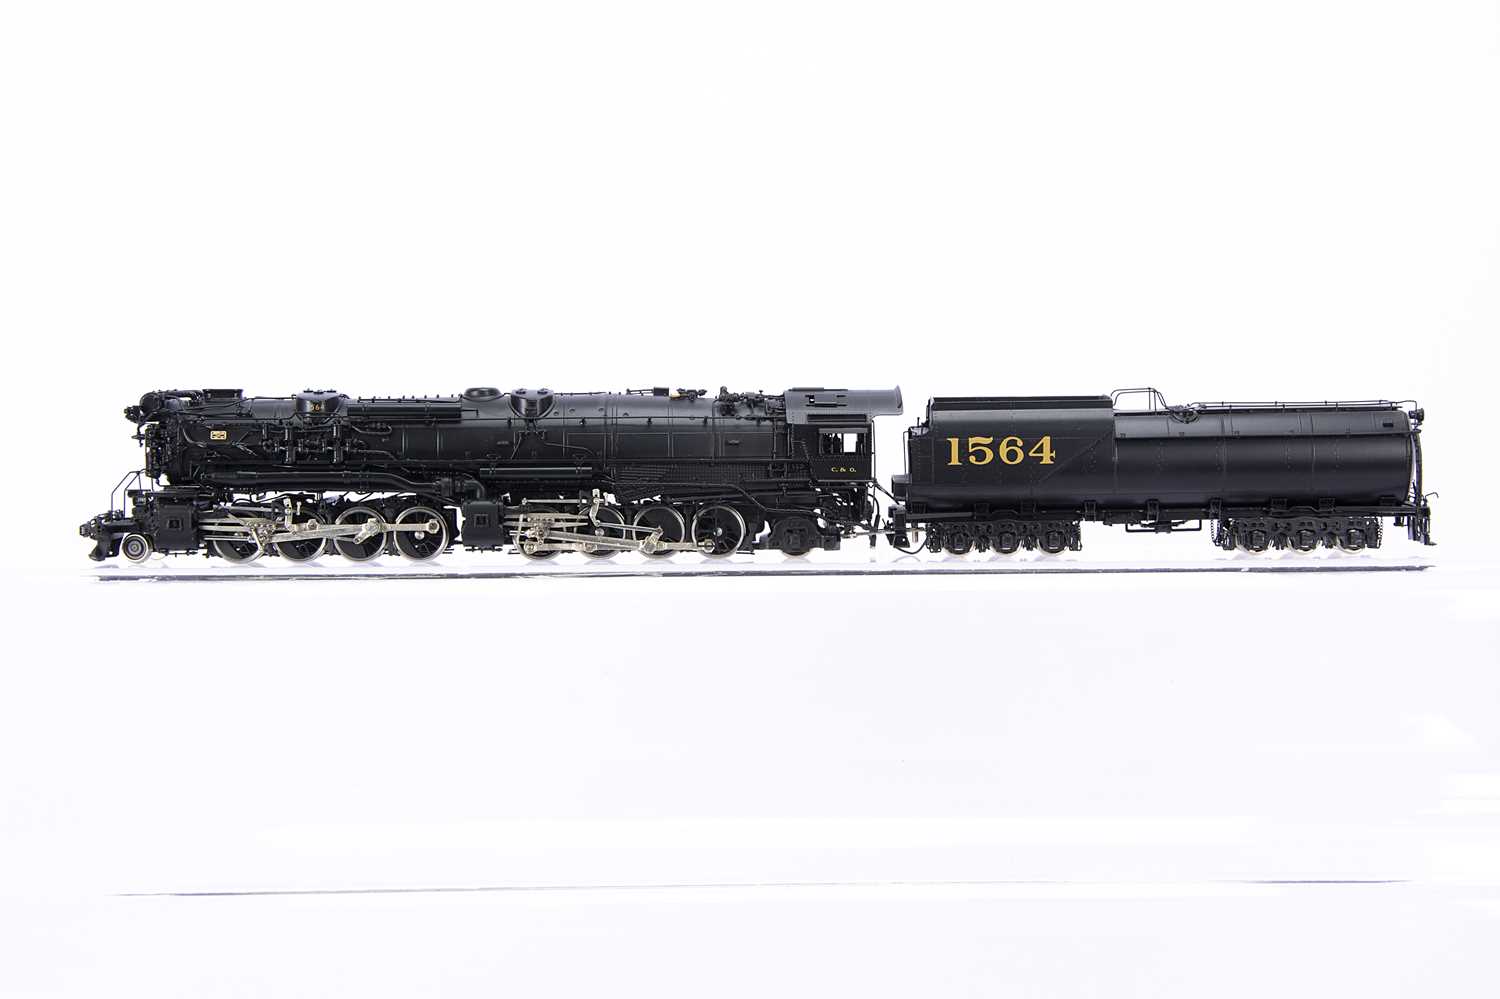 Lot 923 - Challenger Imports Ltd H0 Gauge Chesapeake and Ohio Class H7 2-8-8-2 Locomotive #1564 with 16VB Tender Factory Painted Catalog #2063.1